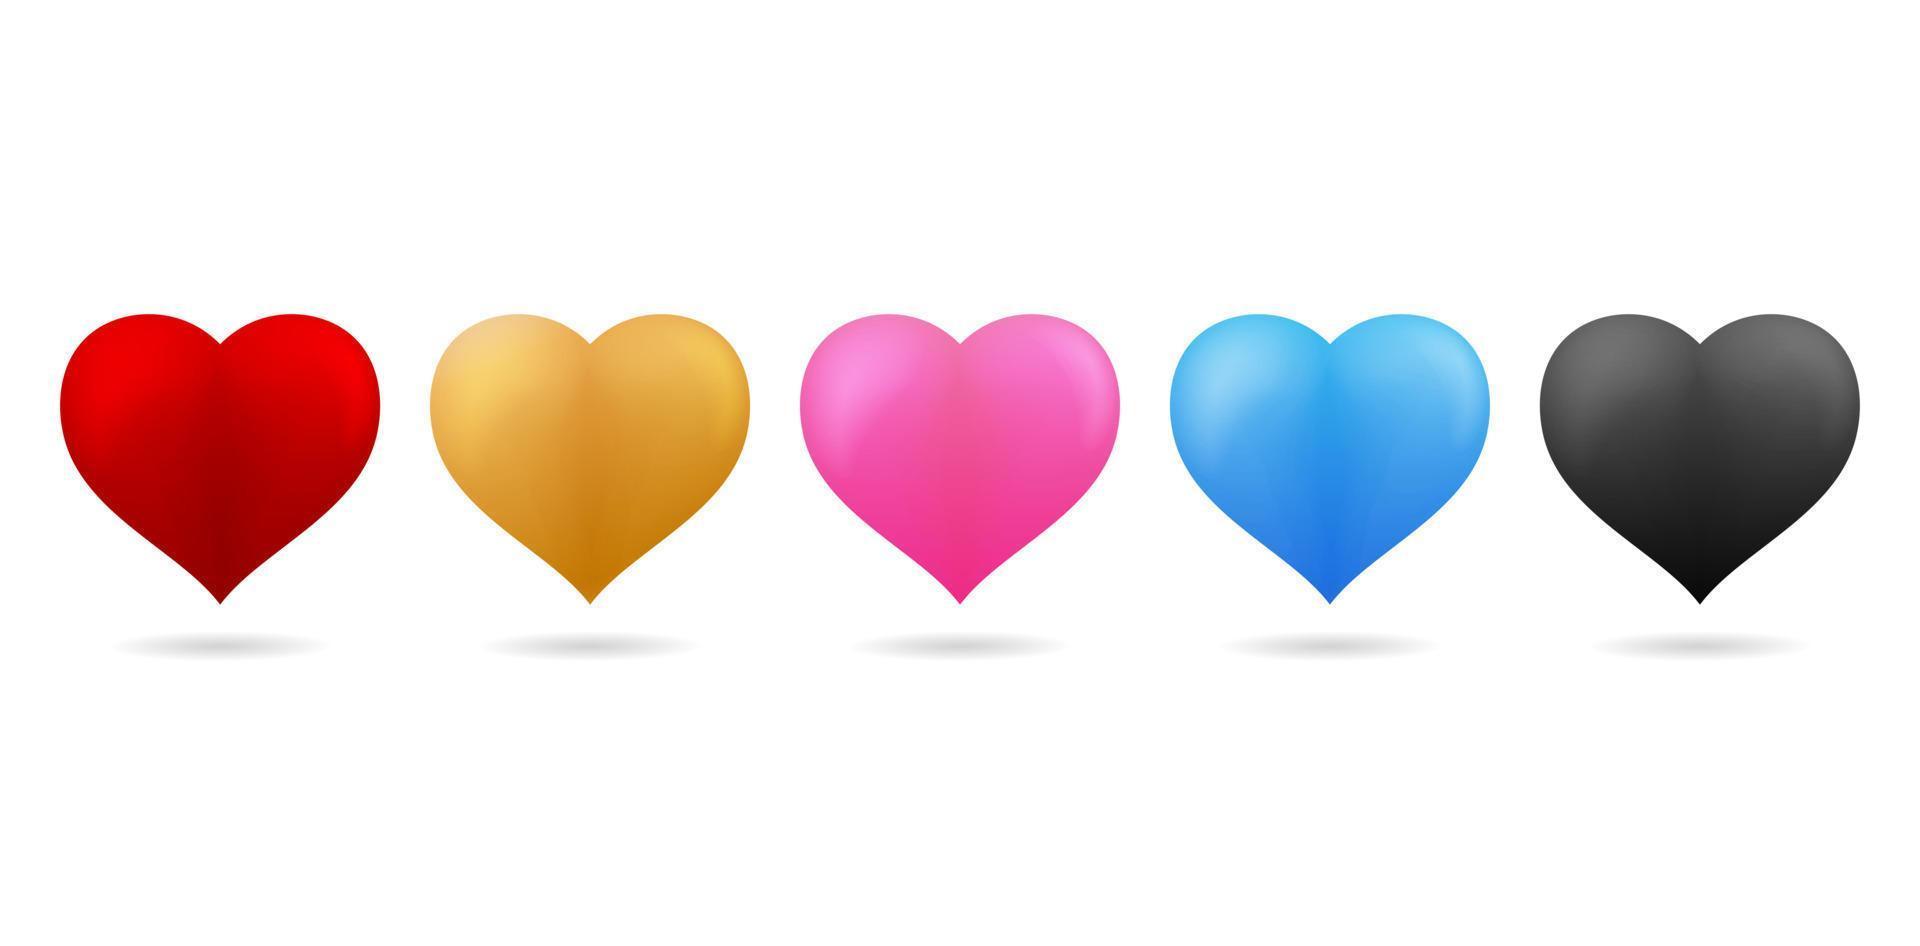 Vector illustration Set of colorful hearts isolated on white backgrounds for decks, collages, and scene designs, User interface, Branding or identity campaigns, Stationery and print layouts banner